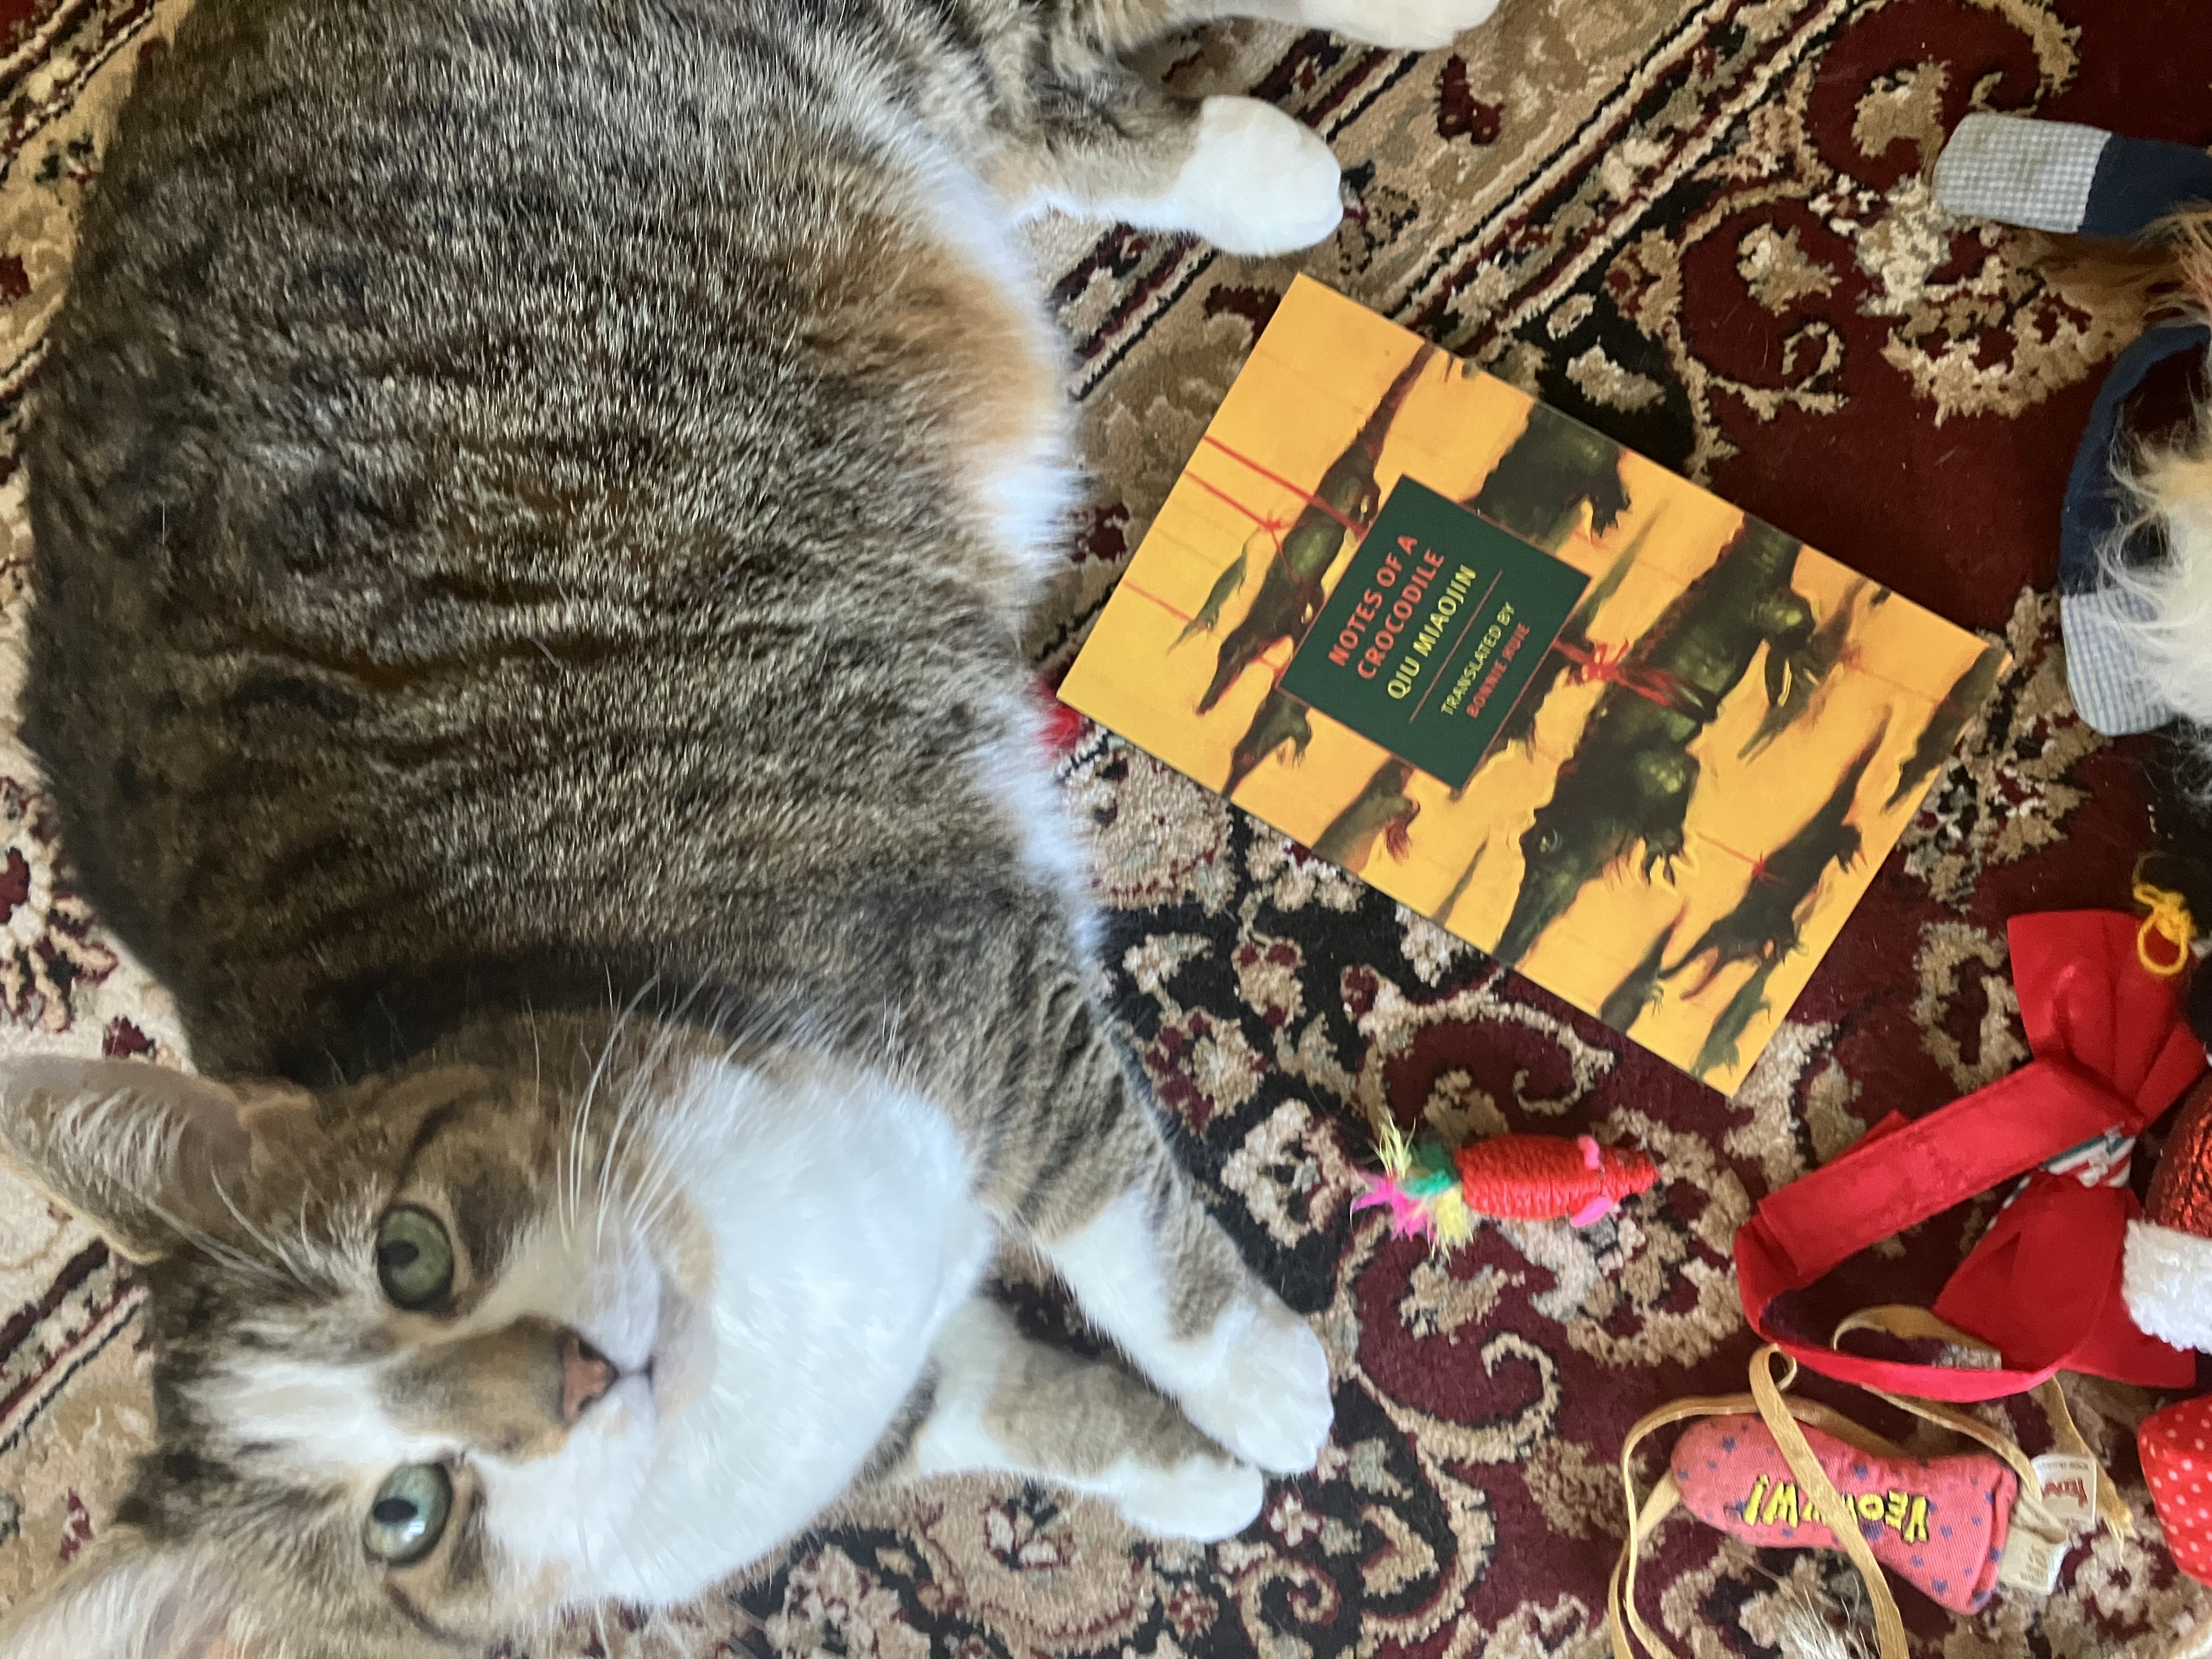 A tabby cat looks up at the camera. Beside her is a book titled Notes of a Crocodile by Qiu Miaojin.